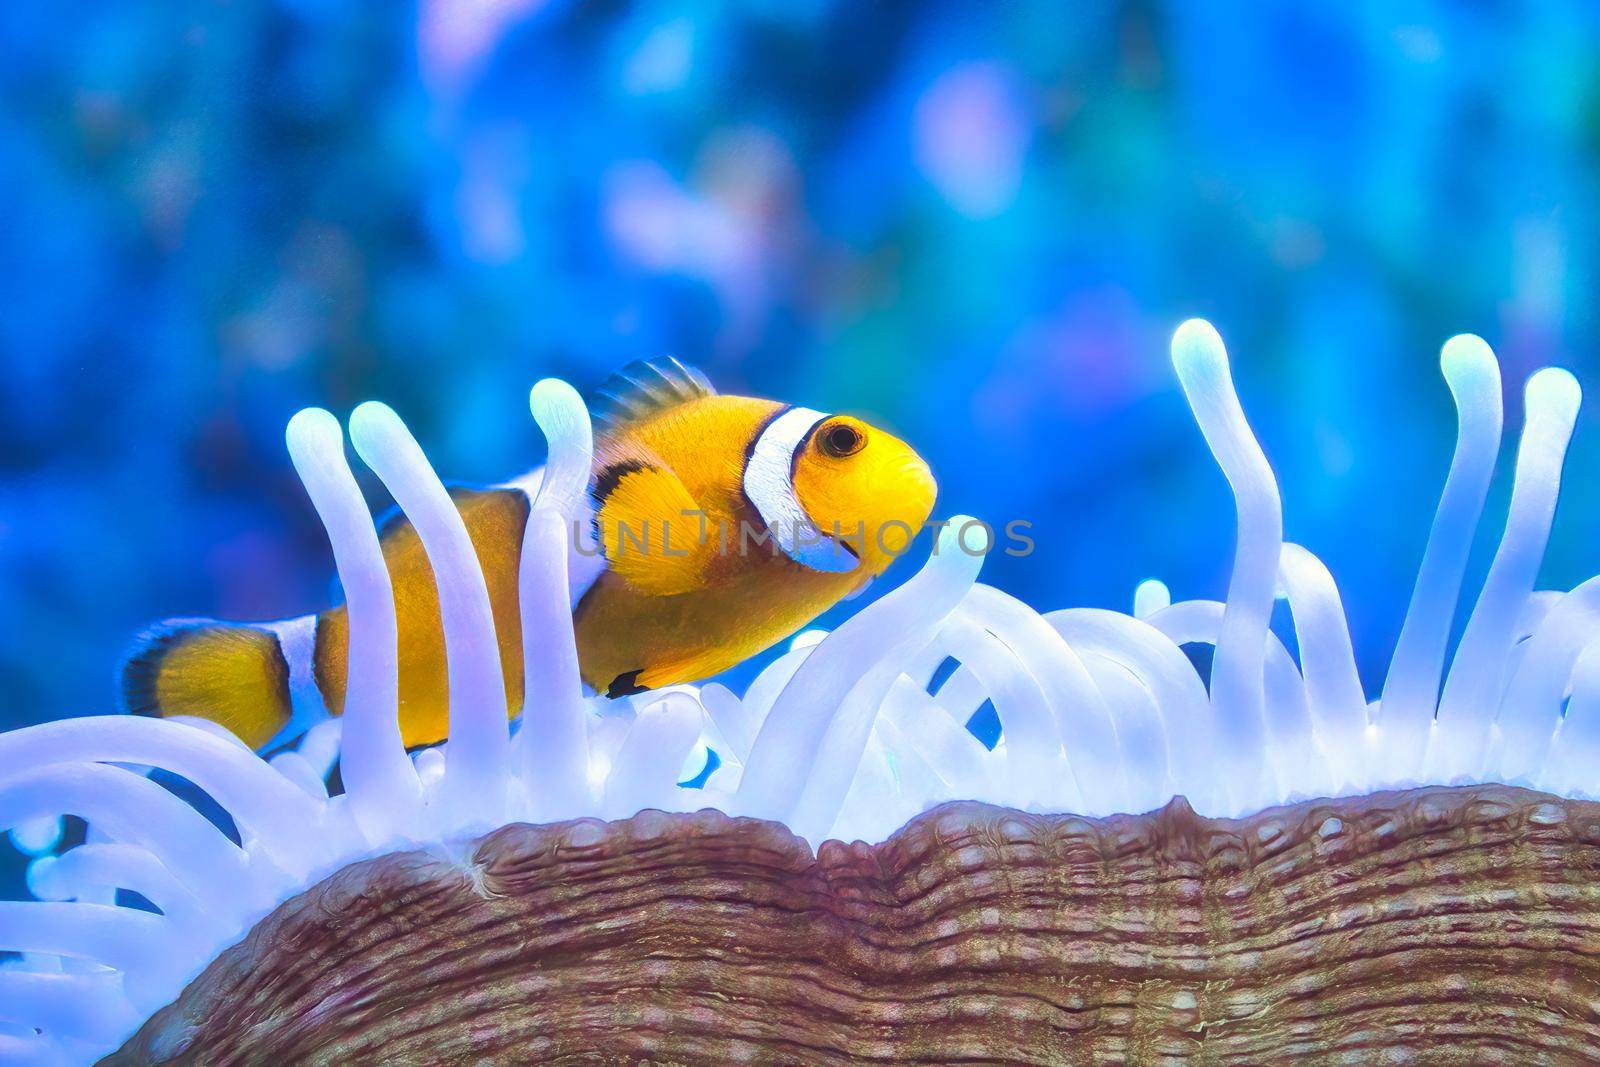 A yellow and white clown fish swimming among the tentacles of a sea anemone by tennesseewitney